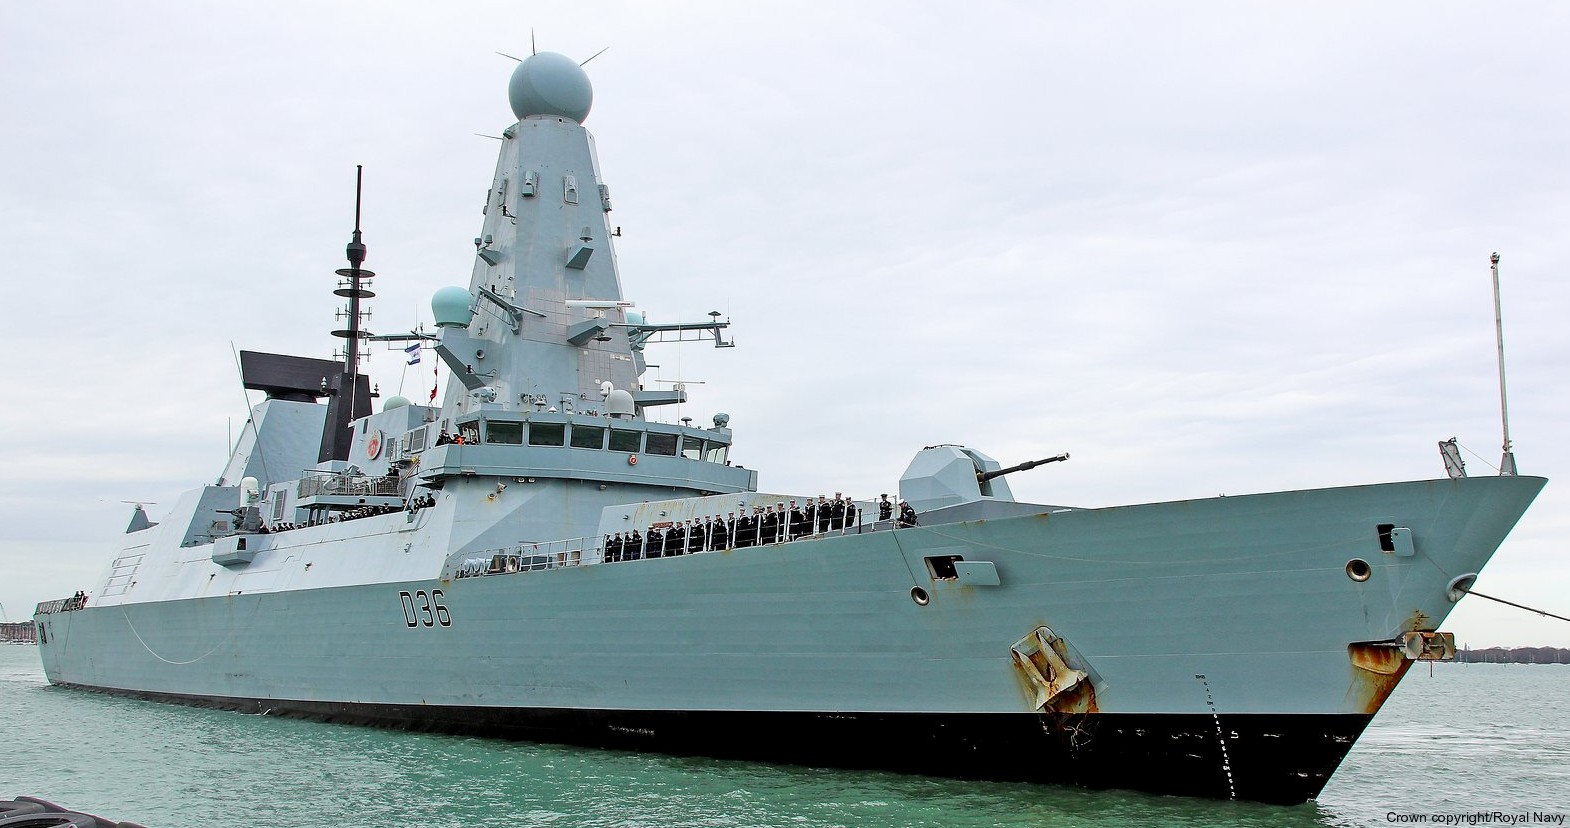 d36 hms defender d-36 type 45 daring class guided missile destroyer ddg royal navy sea viper 38